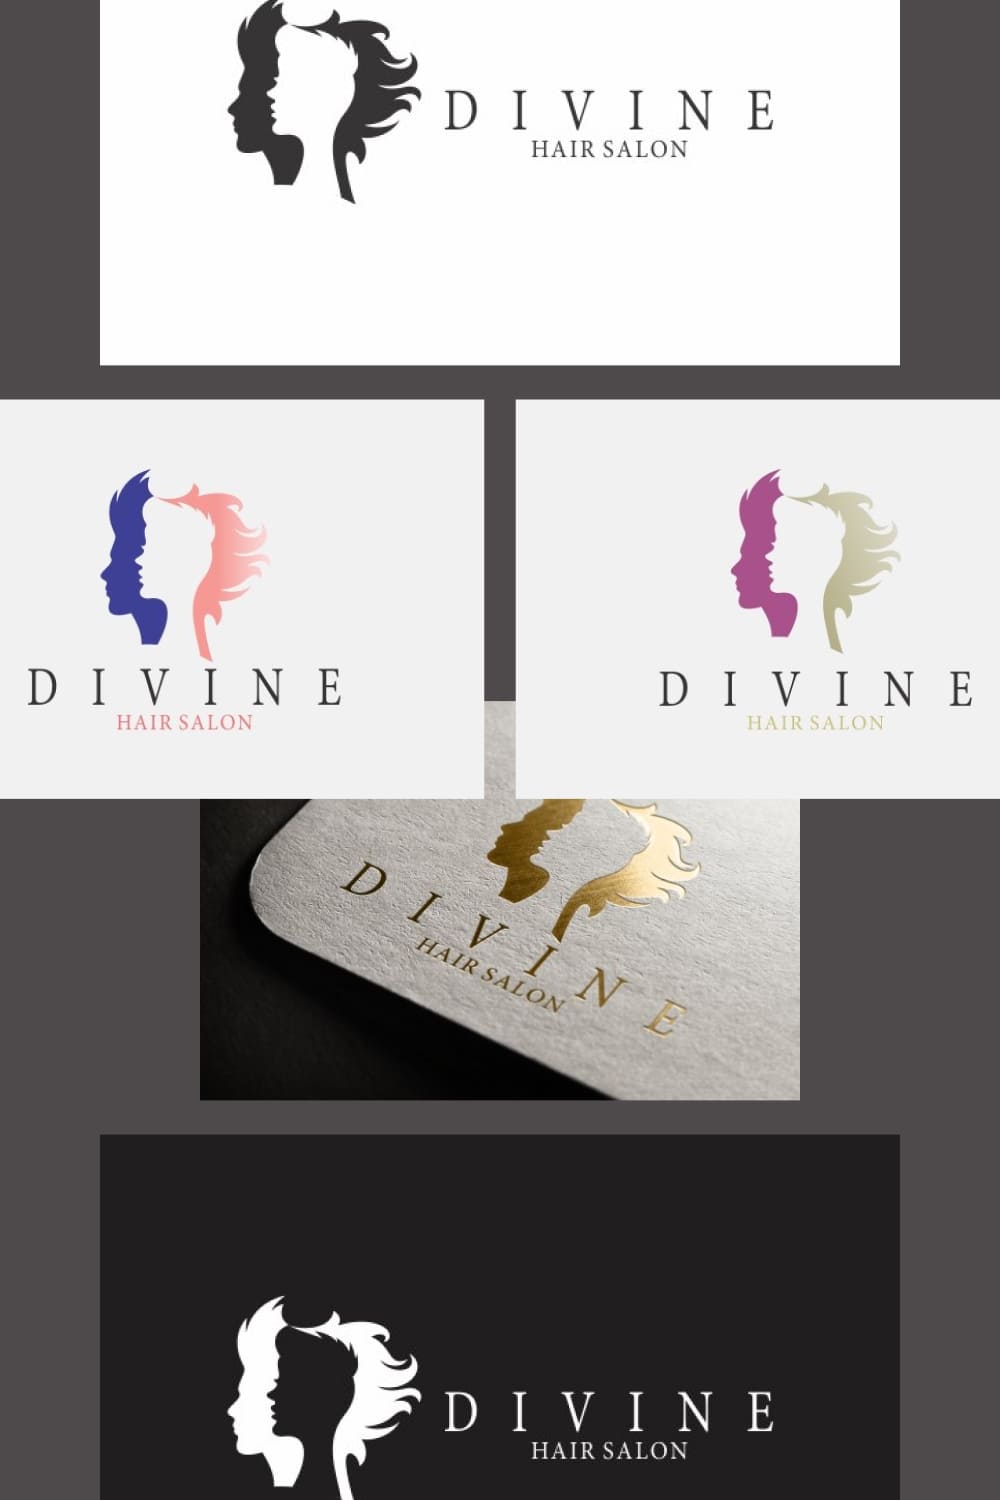 Use this template for your logo brand.